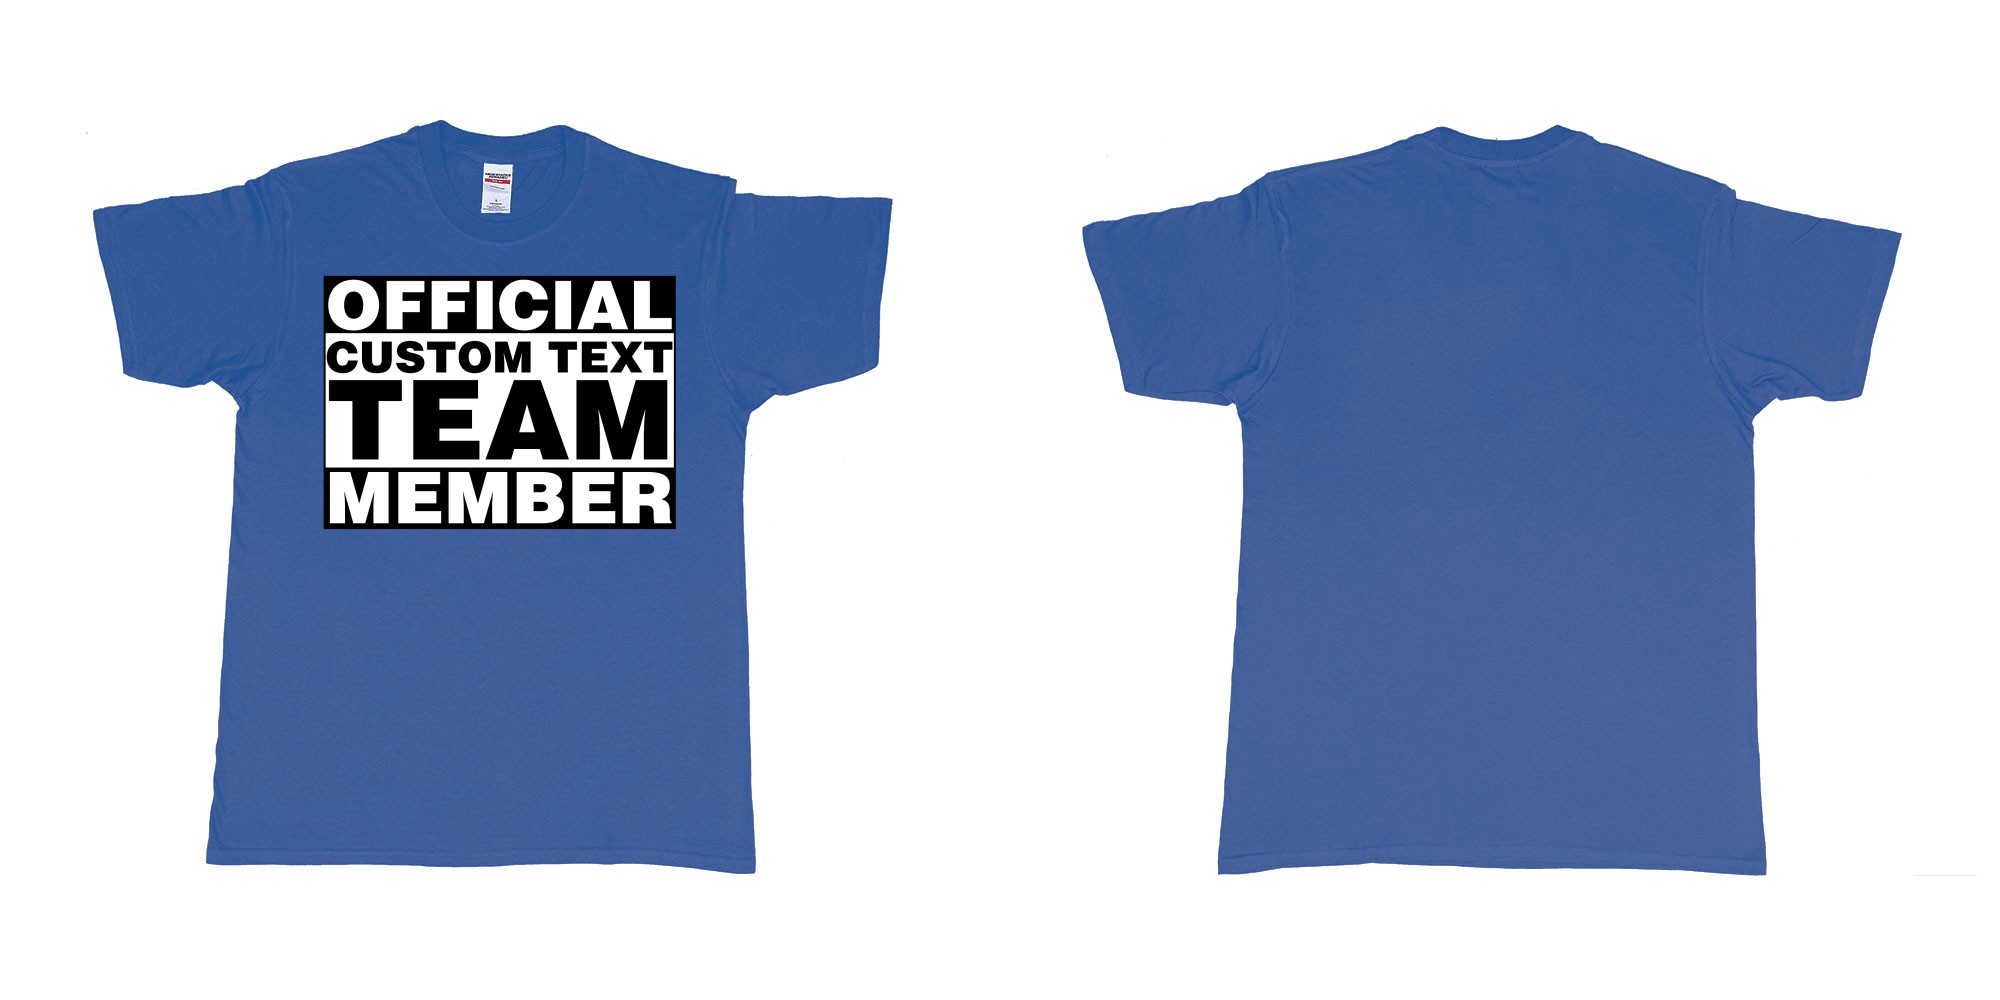 Custom tshirt design official custom text team member in fabric color royal-blue choice your own text made in Bali by The Pirate Way